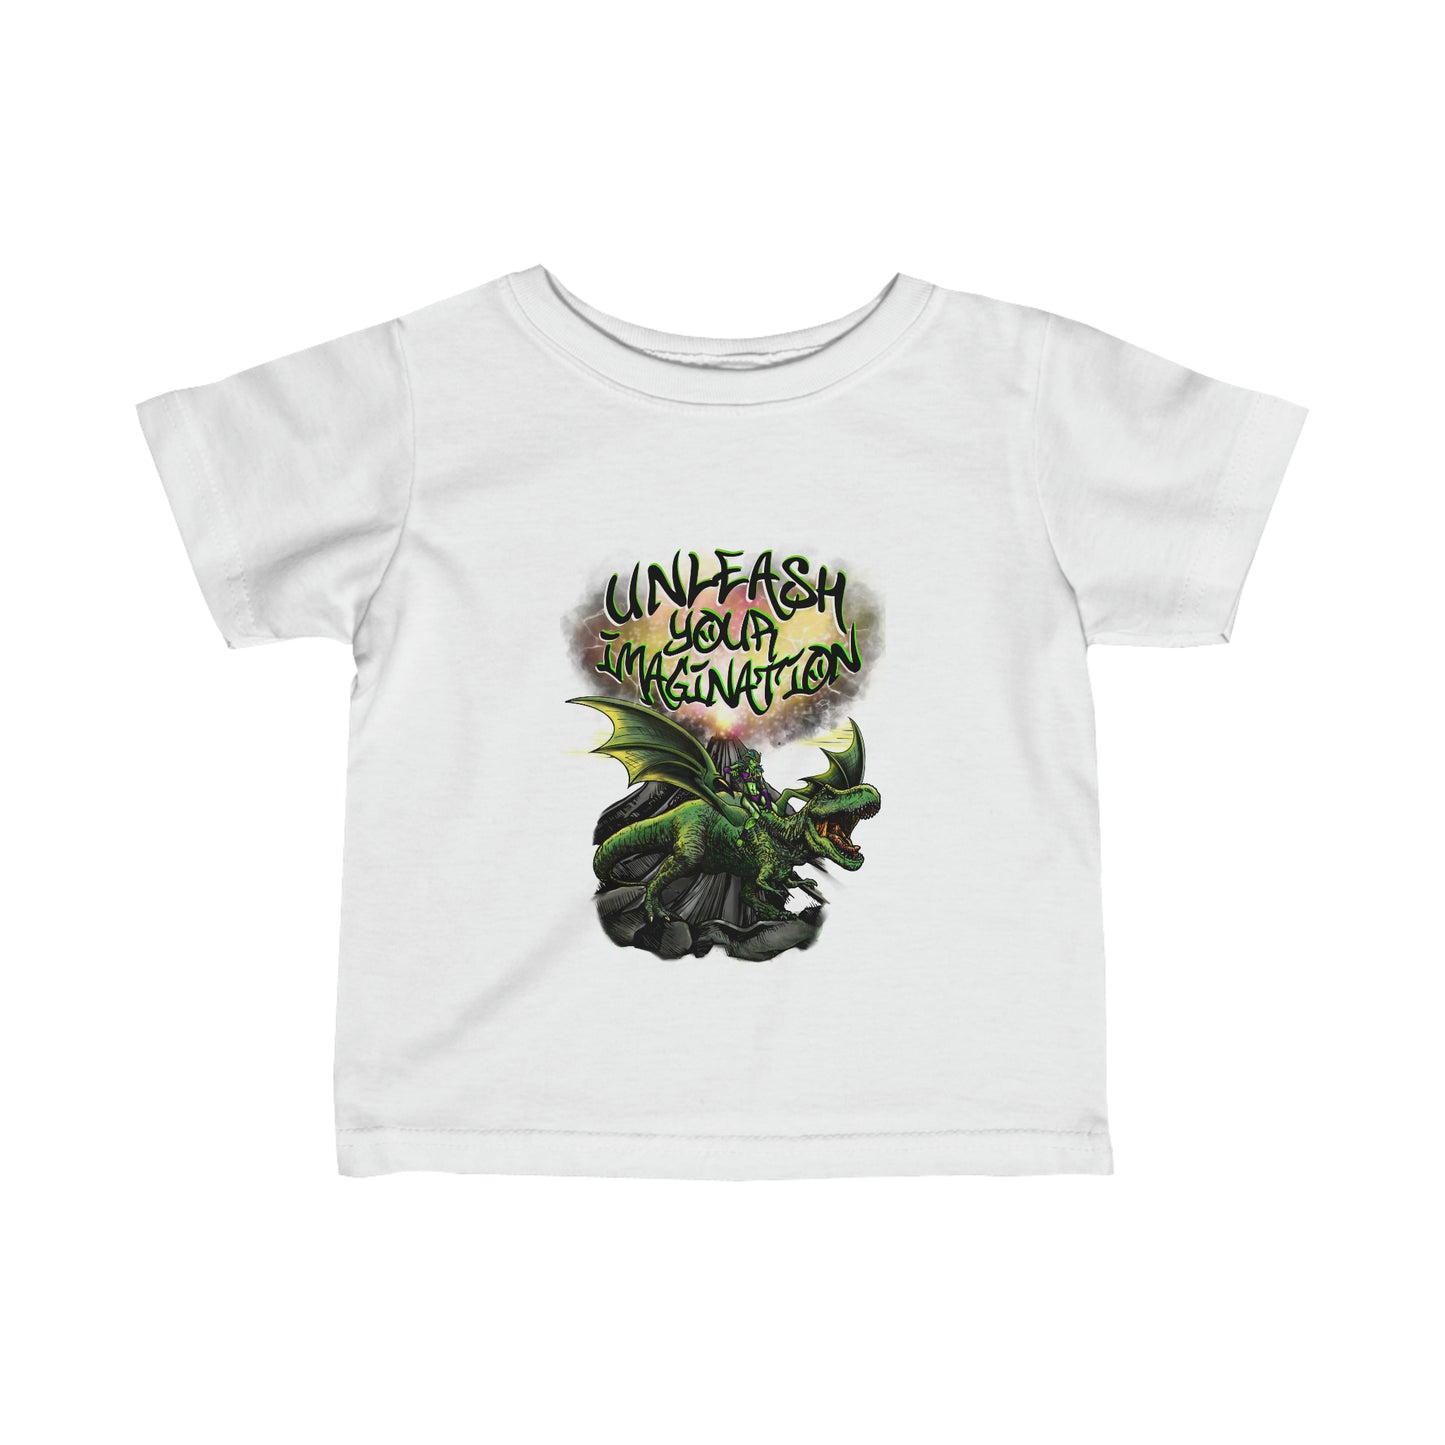 Unleash your Imagination, green Letters Infant Fine Jersey Tee